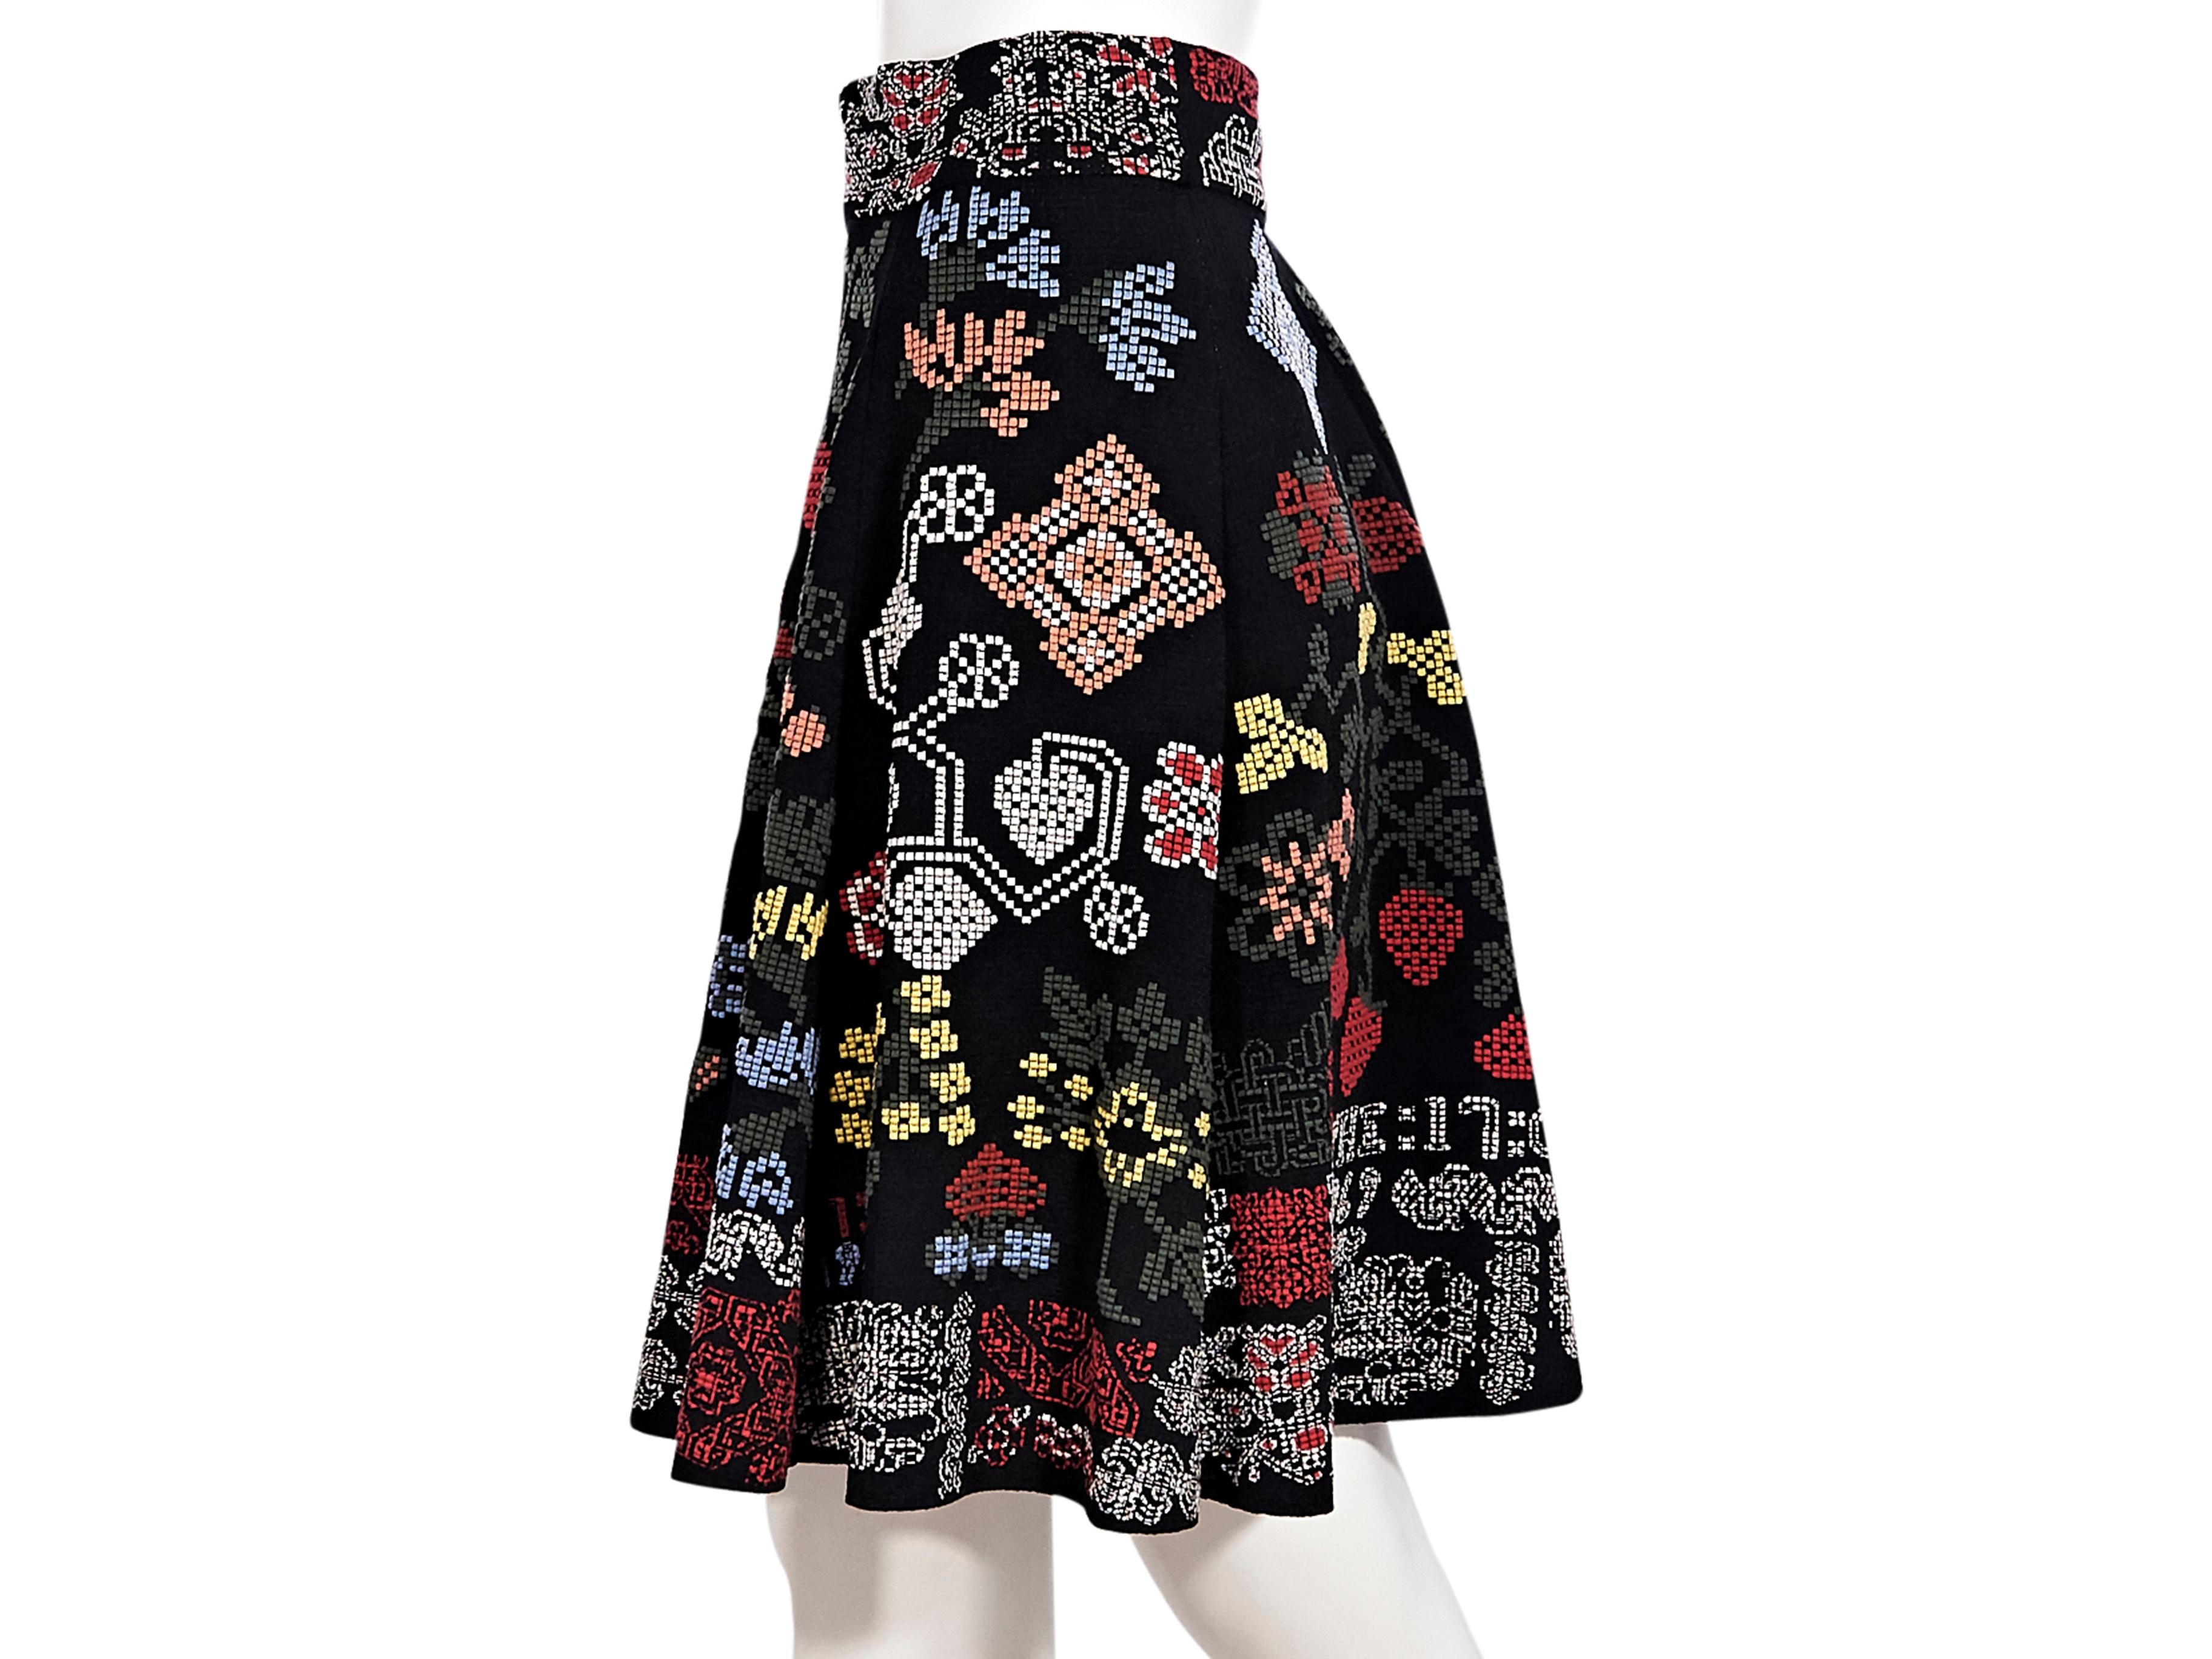 Product details:  Multicolor silk-blend stretch knit skirt by Alexander McQueen.  Banded waist.  Pull-on style.  27